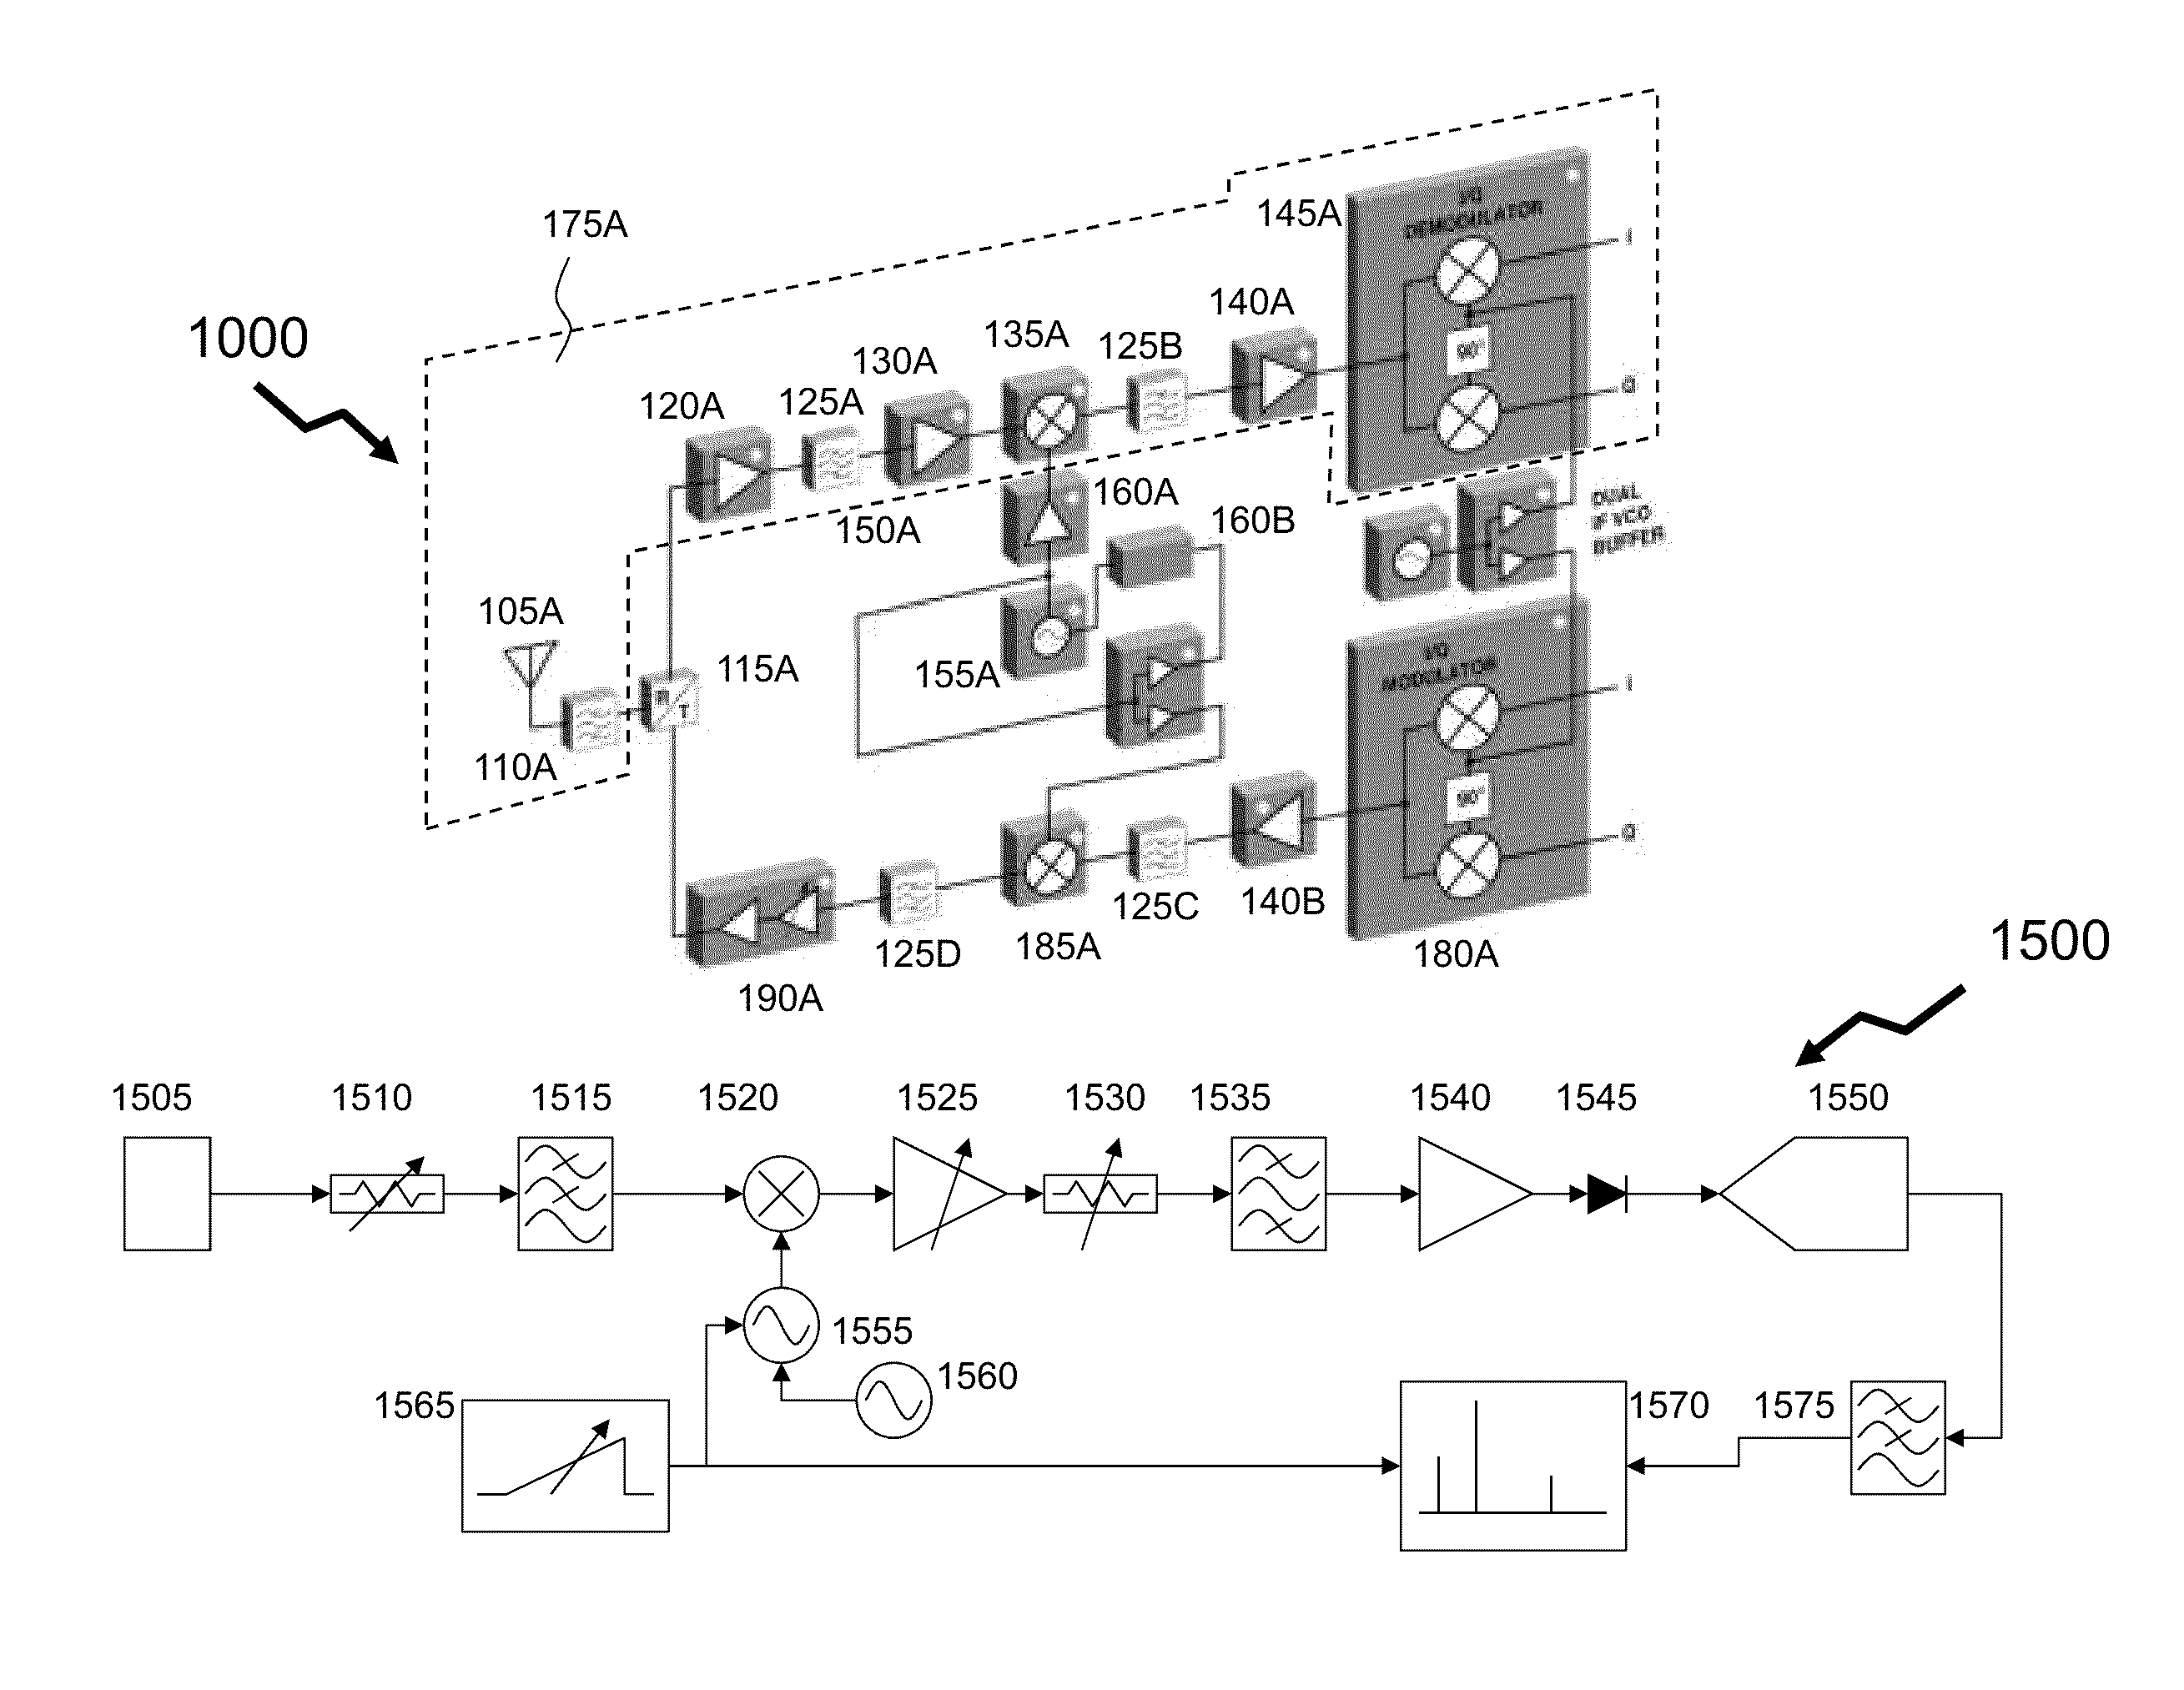 Radio frequency receiver system for wideband signal processing